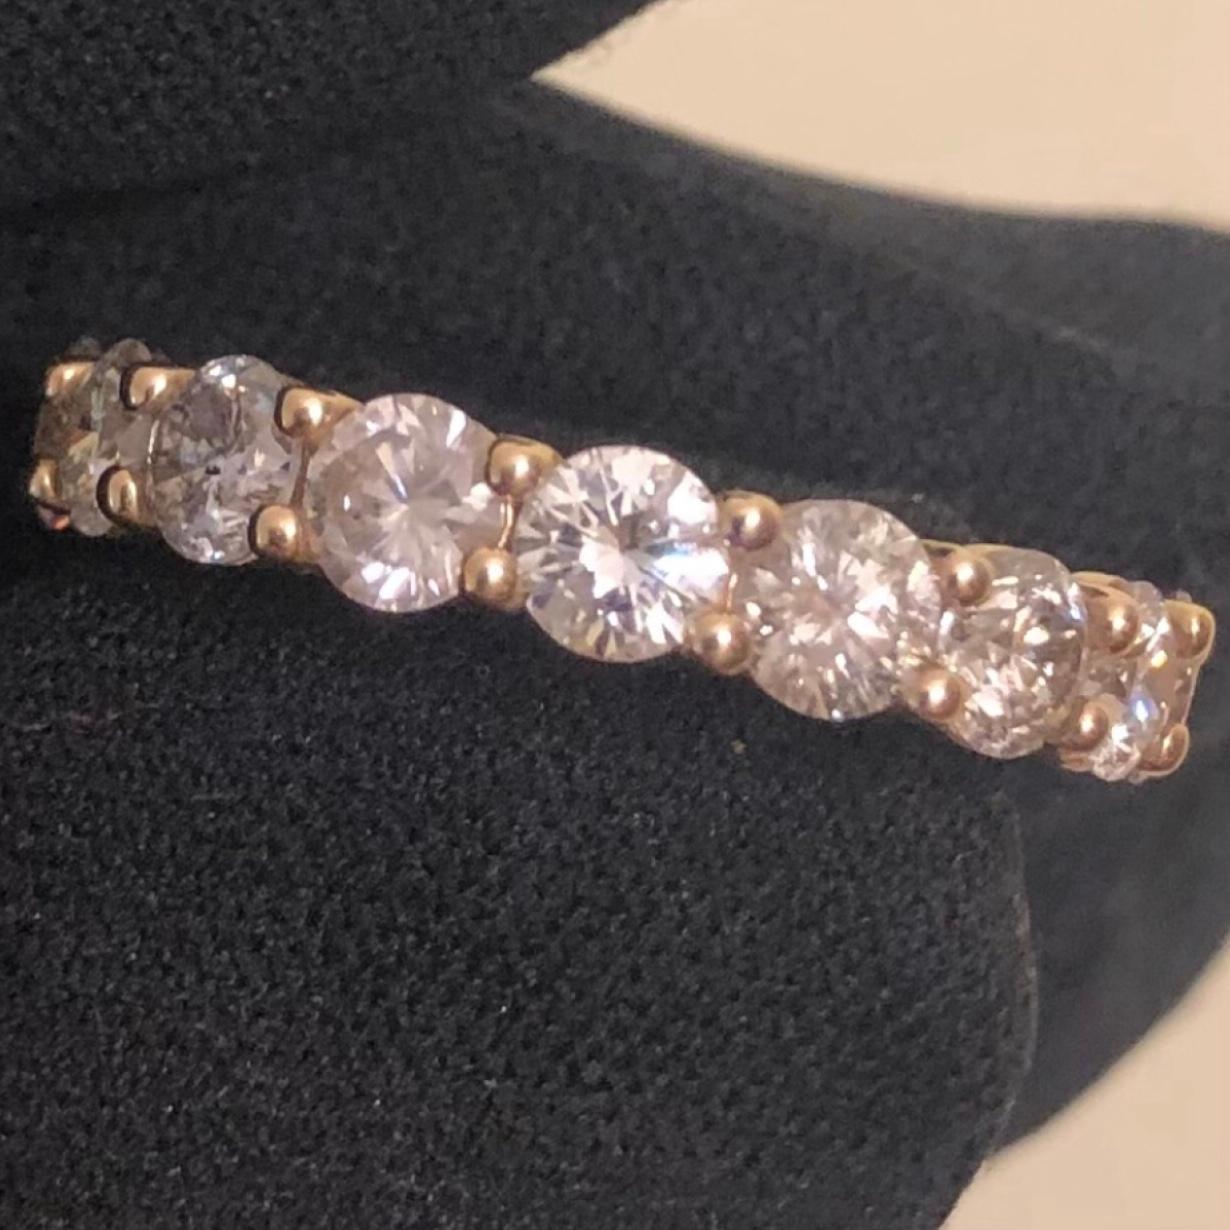 Stunning over 3 carat round diamond full eternity band ring in 14k yellow gold. 17 round SI-I clarity solitaire diamonds are hand set in this full eternity band weighing approx. 3.53 carats.


17 natural 1/5 carat solitaire earth-mined diamonds are